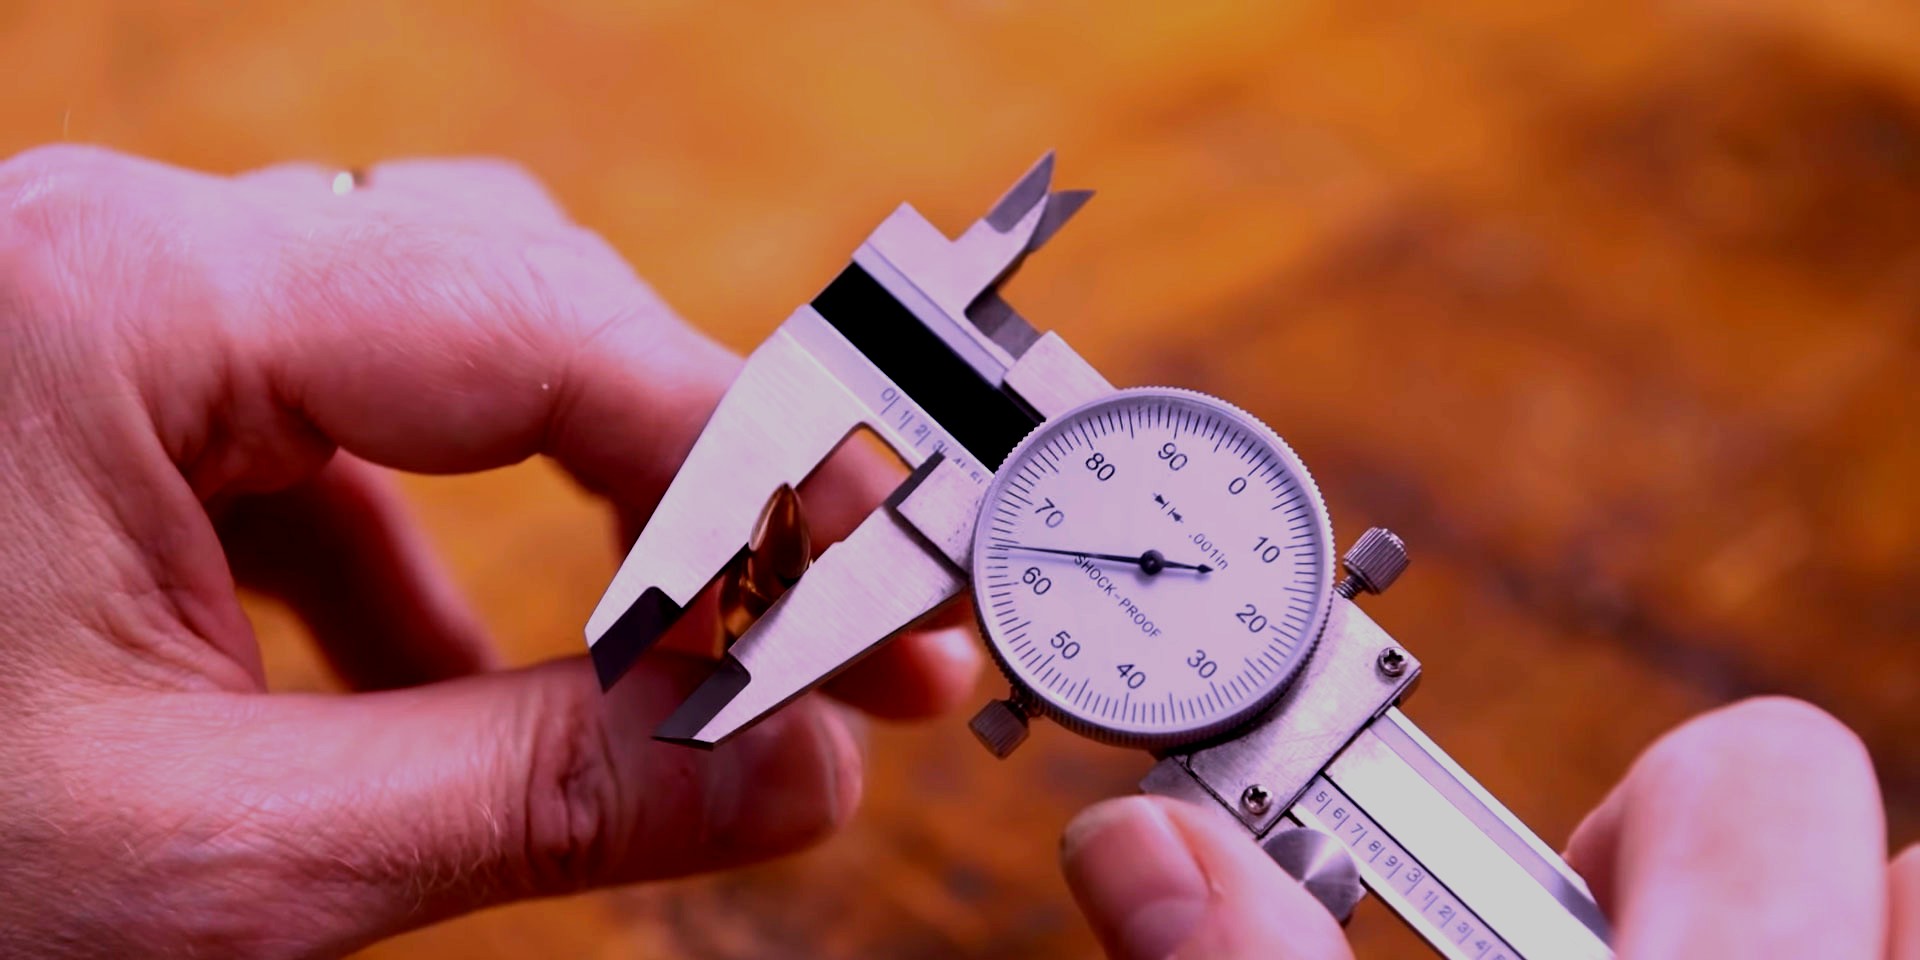 What is the difference between caliper and vernier